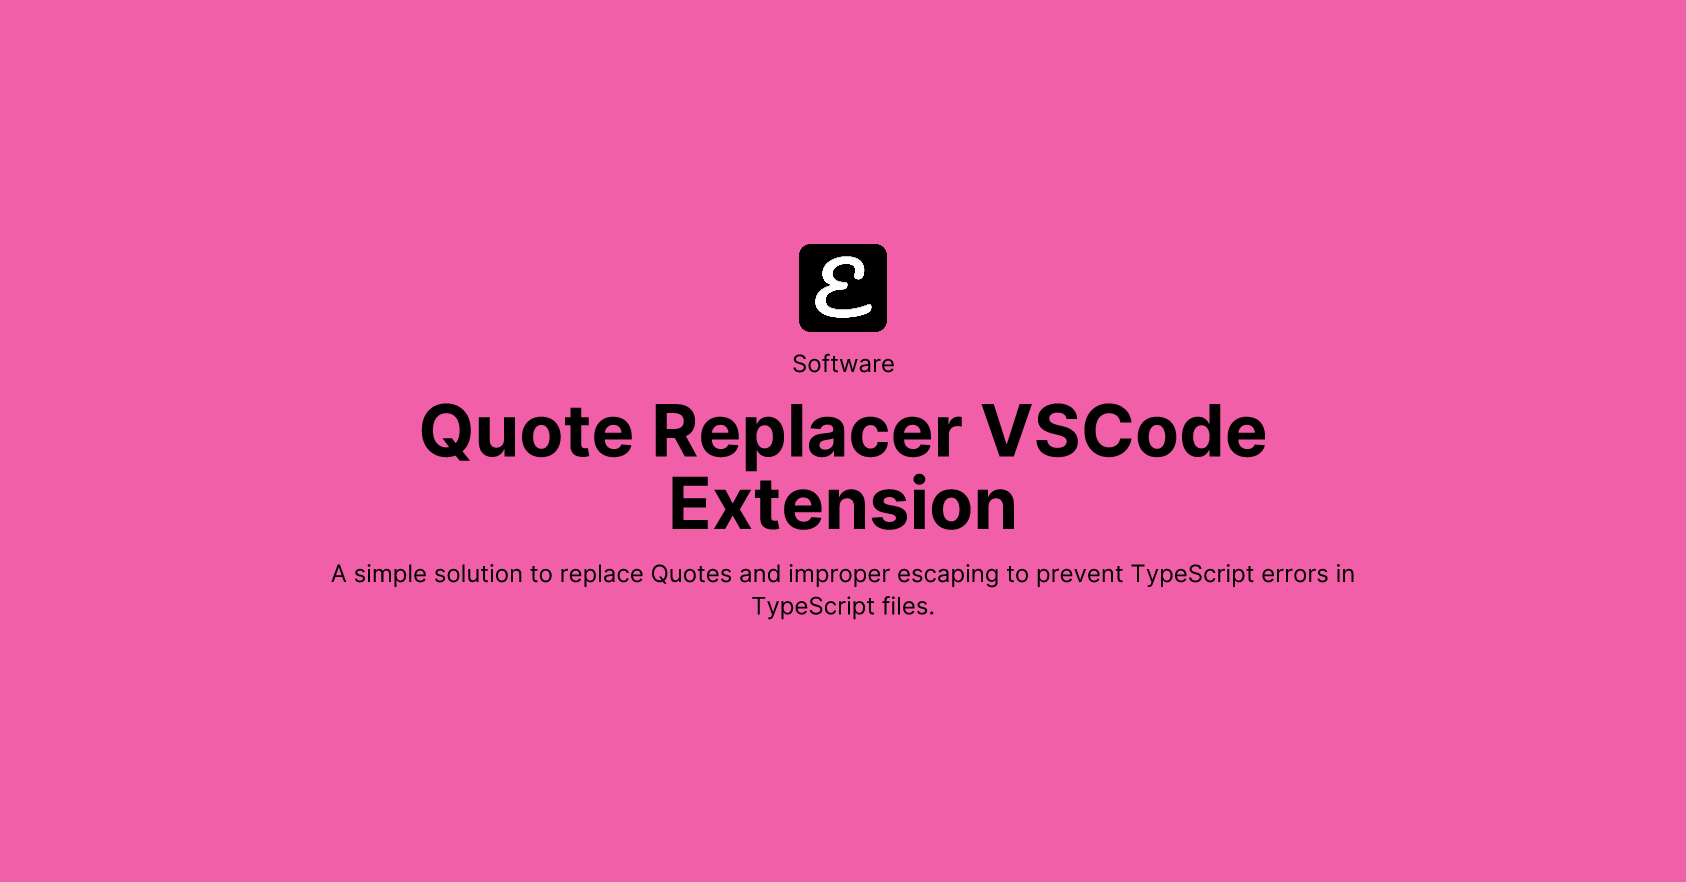 Quote Replacer VSCode Extension by Eric David Smith